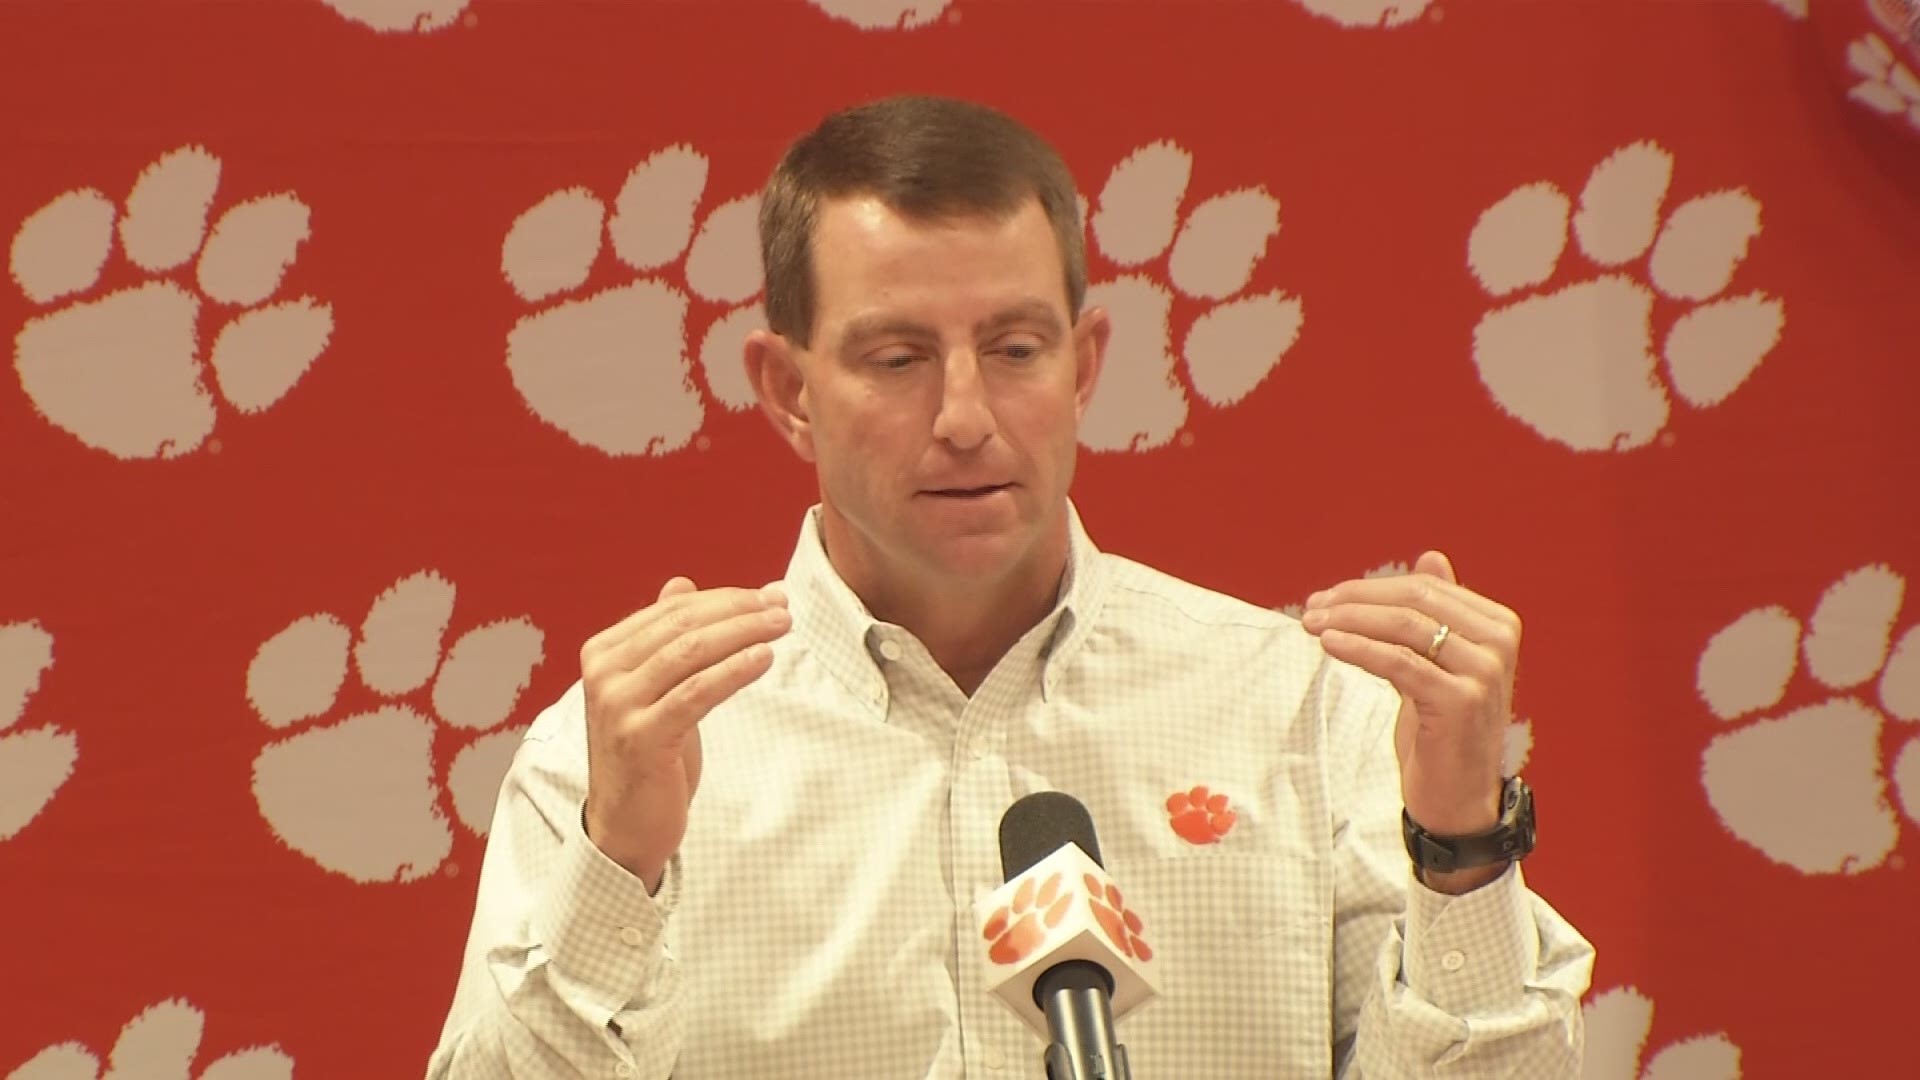 Clemson's Dabo Swinney tries to stay grounded, as difficult as that may seem, when it comes to the Carolina-Clemson rivalry.